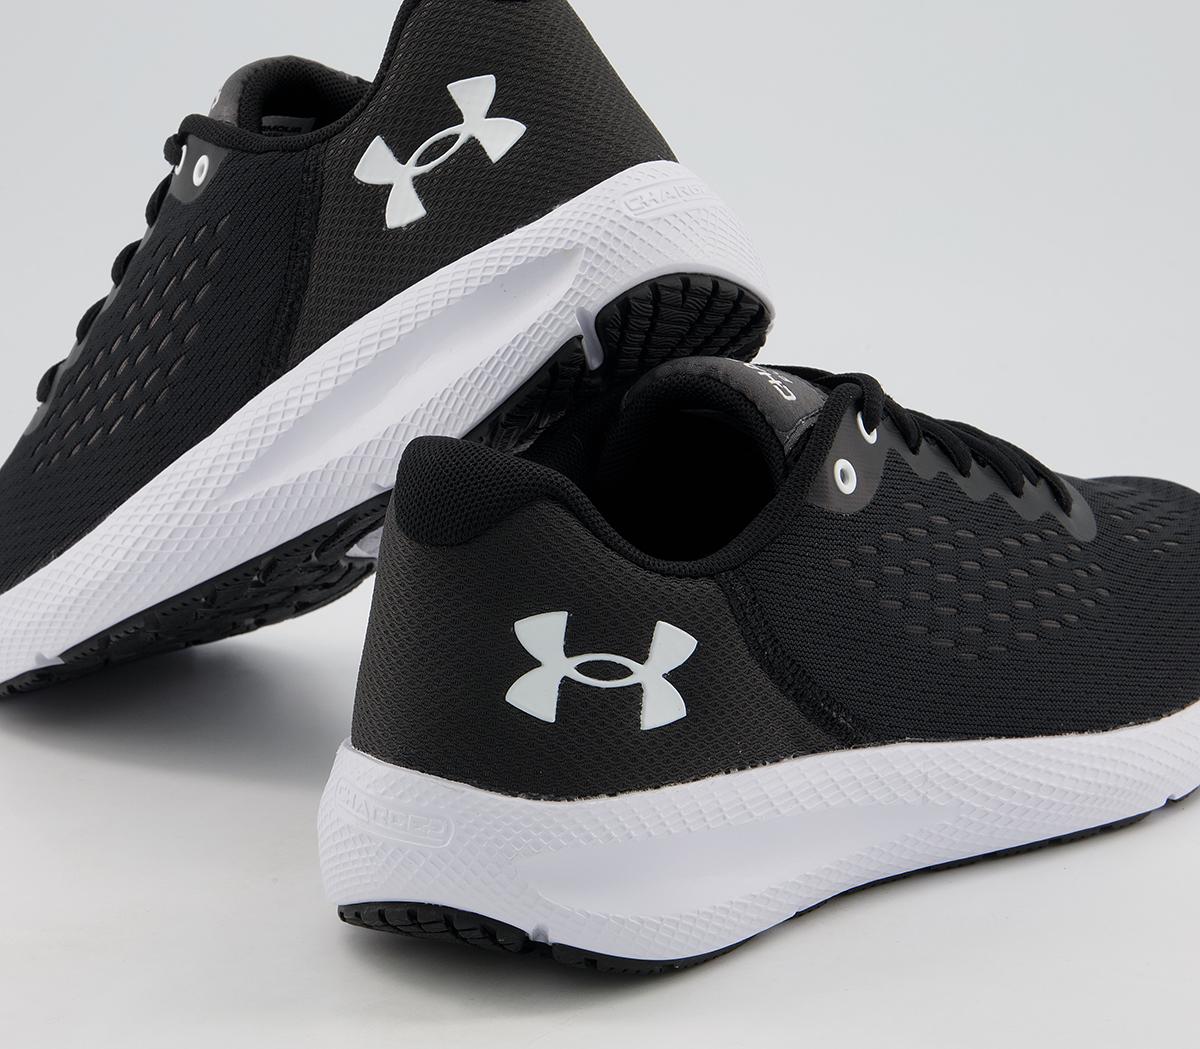 Under Armour Charged Pursuit 2 Trainers Black White - His trainers